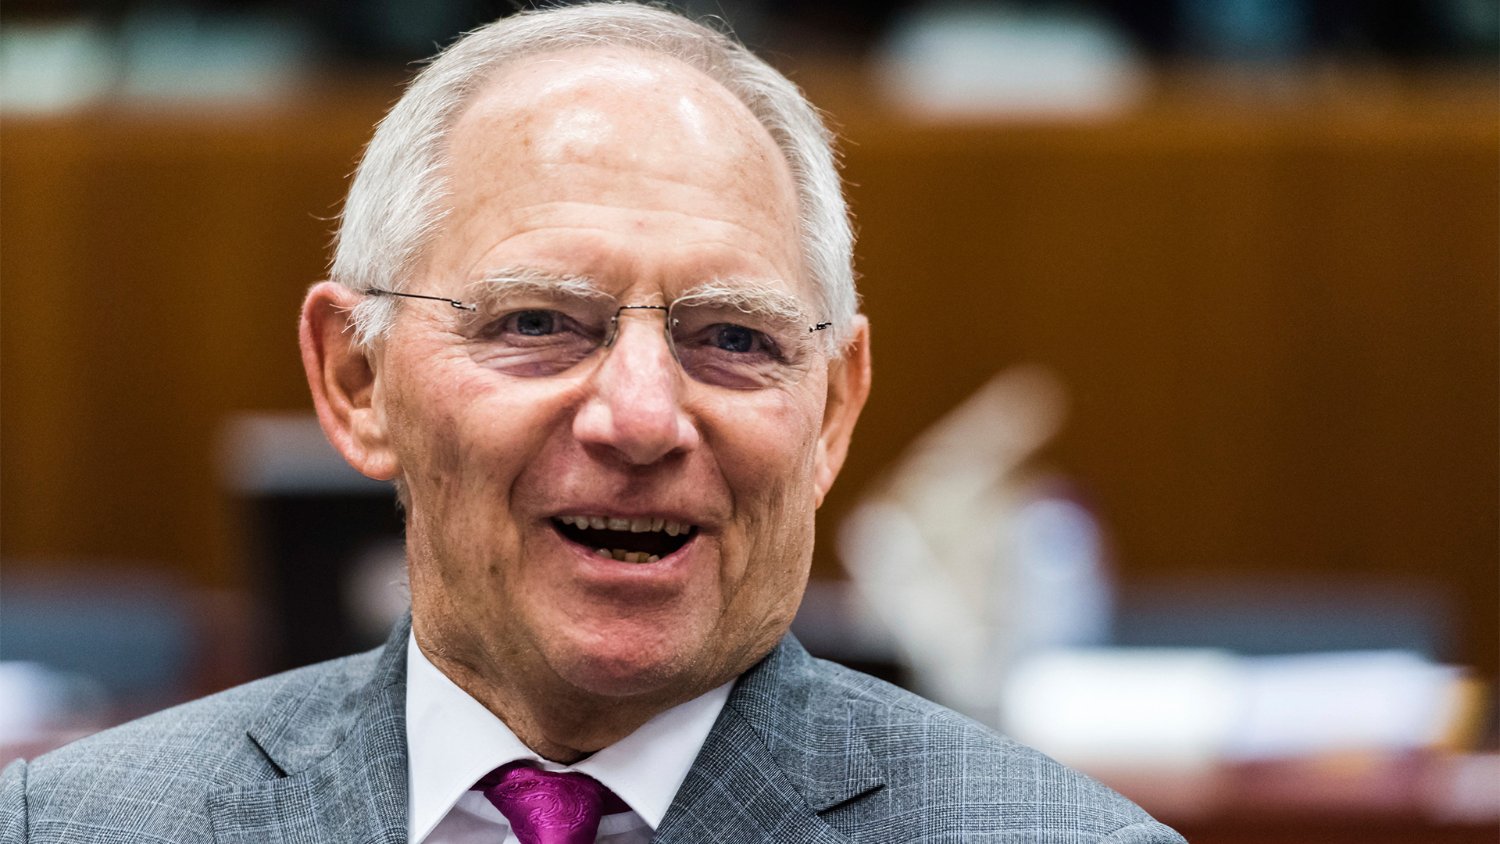 Wolfgang Schäuble smile